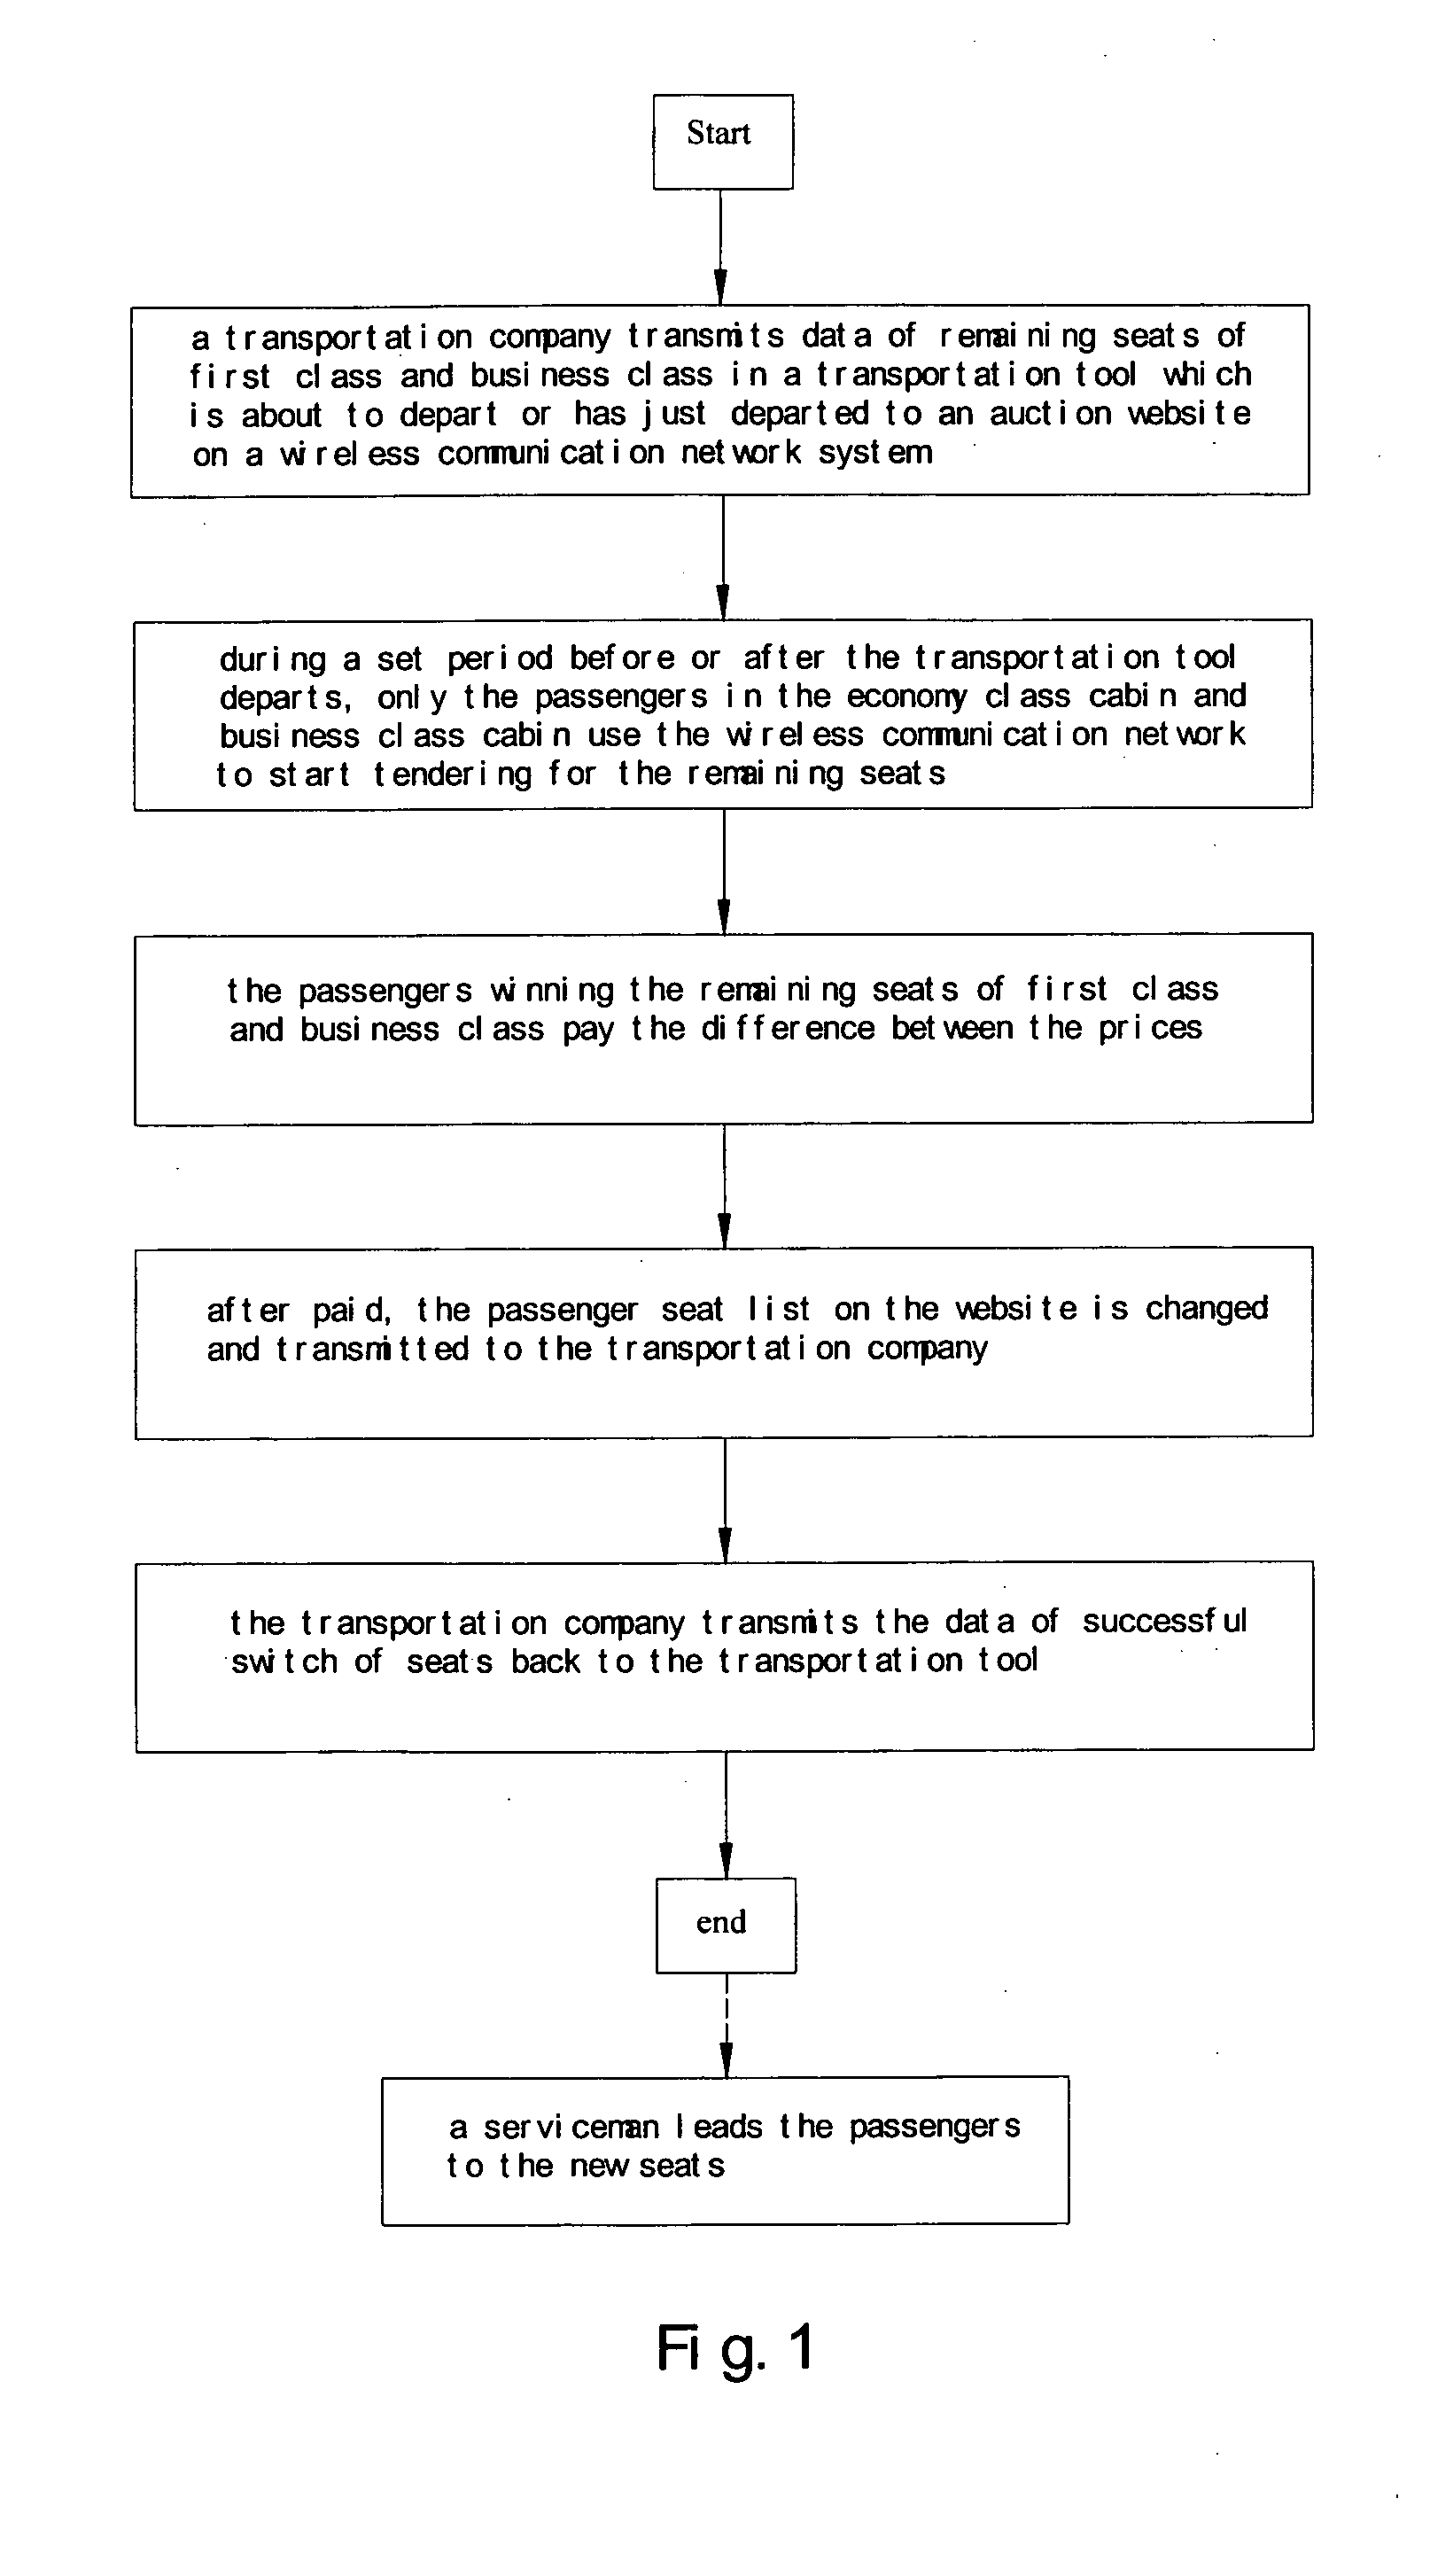 Method of using wireless communication device to tender for remaining seats of higher class in a transportation tool which is about to depart or has just departed